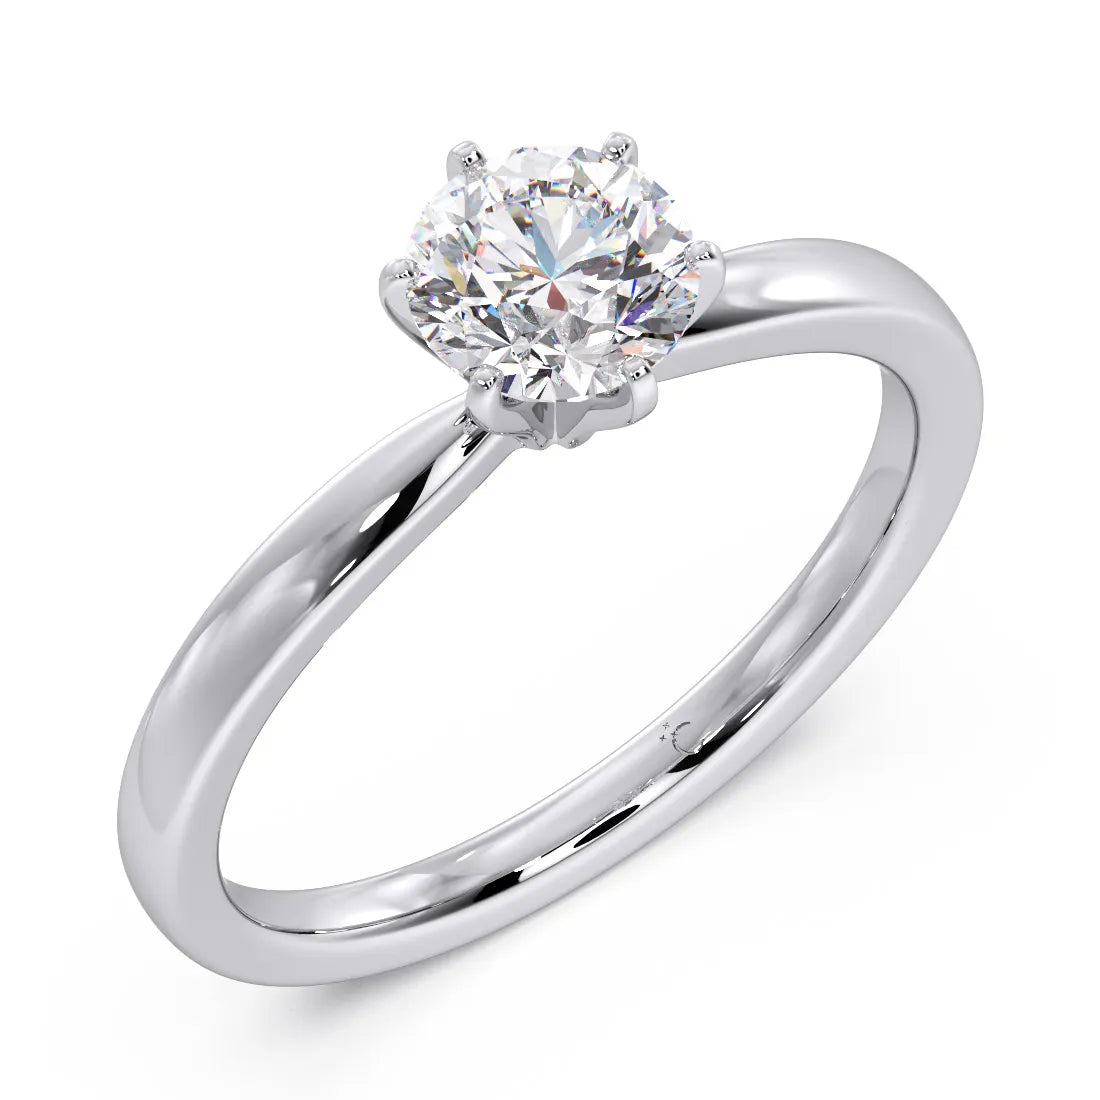 SOLITAIRE RING WITH 1 CRT DIAMOND